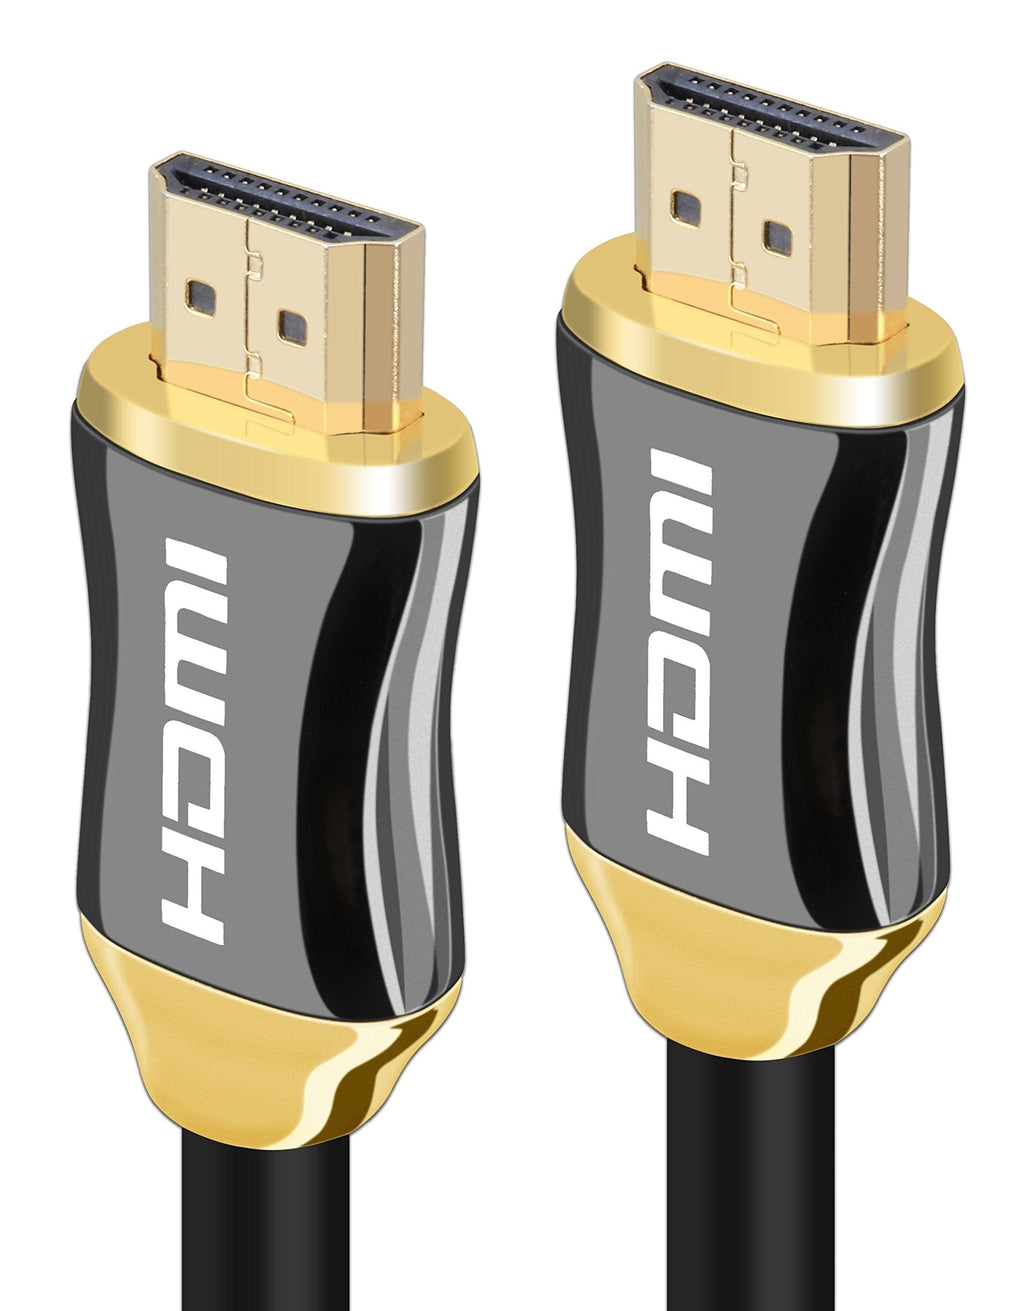 KIN&P HDMI Cable 33ft Ultra High Speed HDMI 2.0 (4K) HDMI Cables for Playstation PS3 PS4 PC Apple TV, Support 2160P,HD 1080P, 3D,4k,Ethernet,Audio Return(ARC) 33Feet